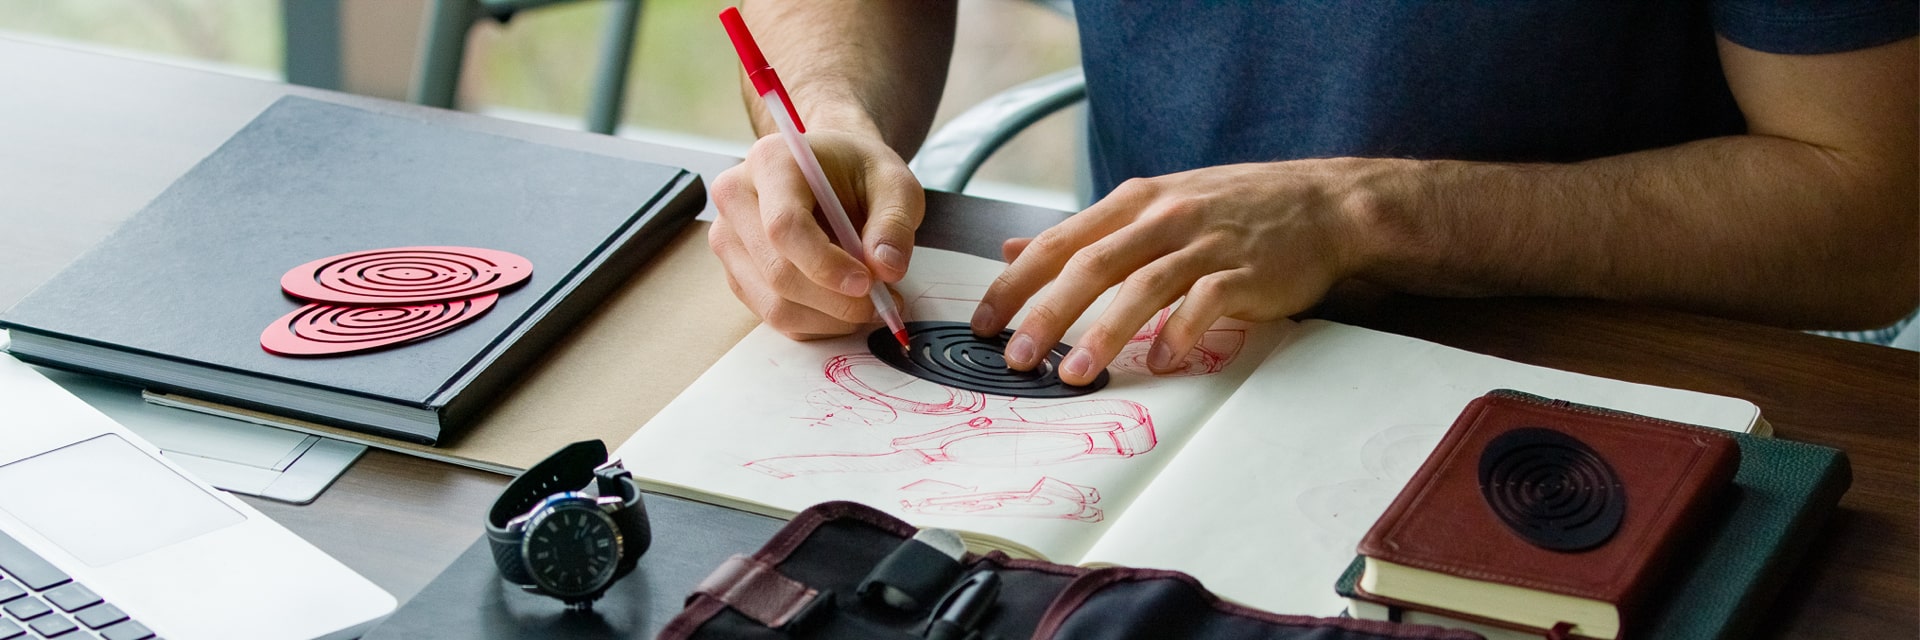 Photo of a sketching tool